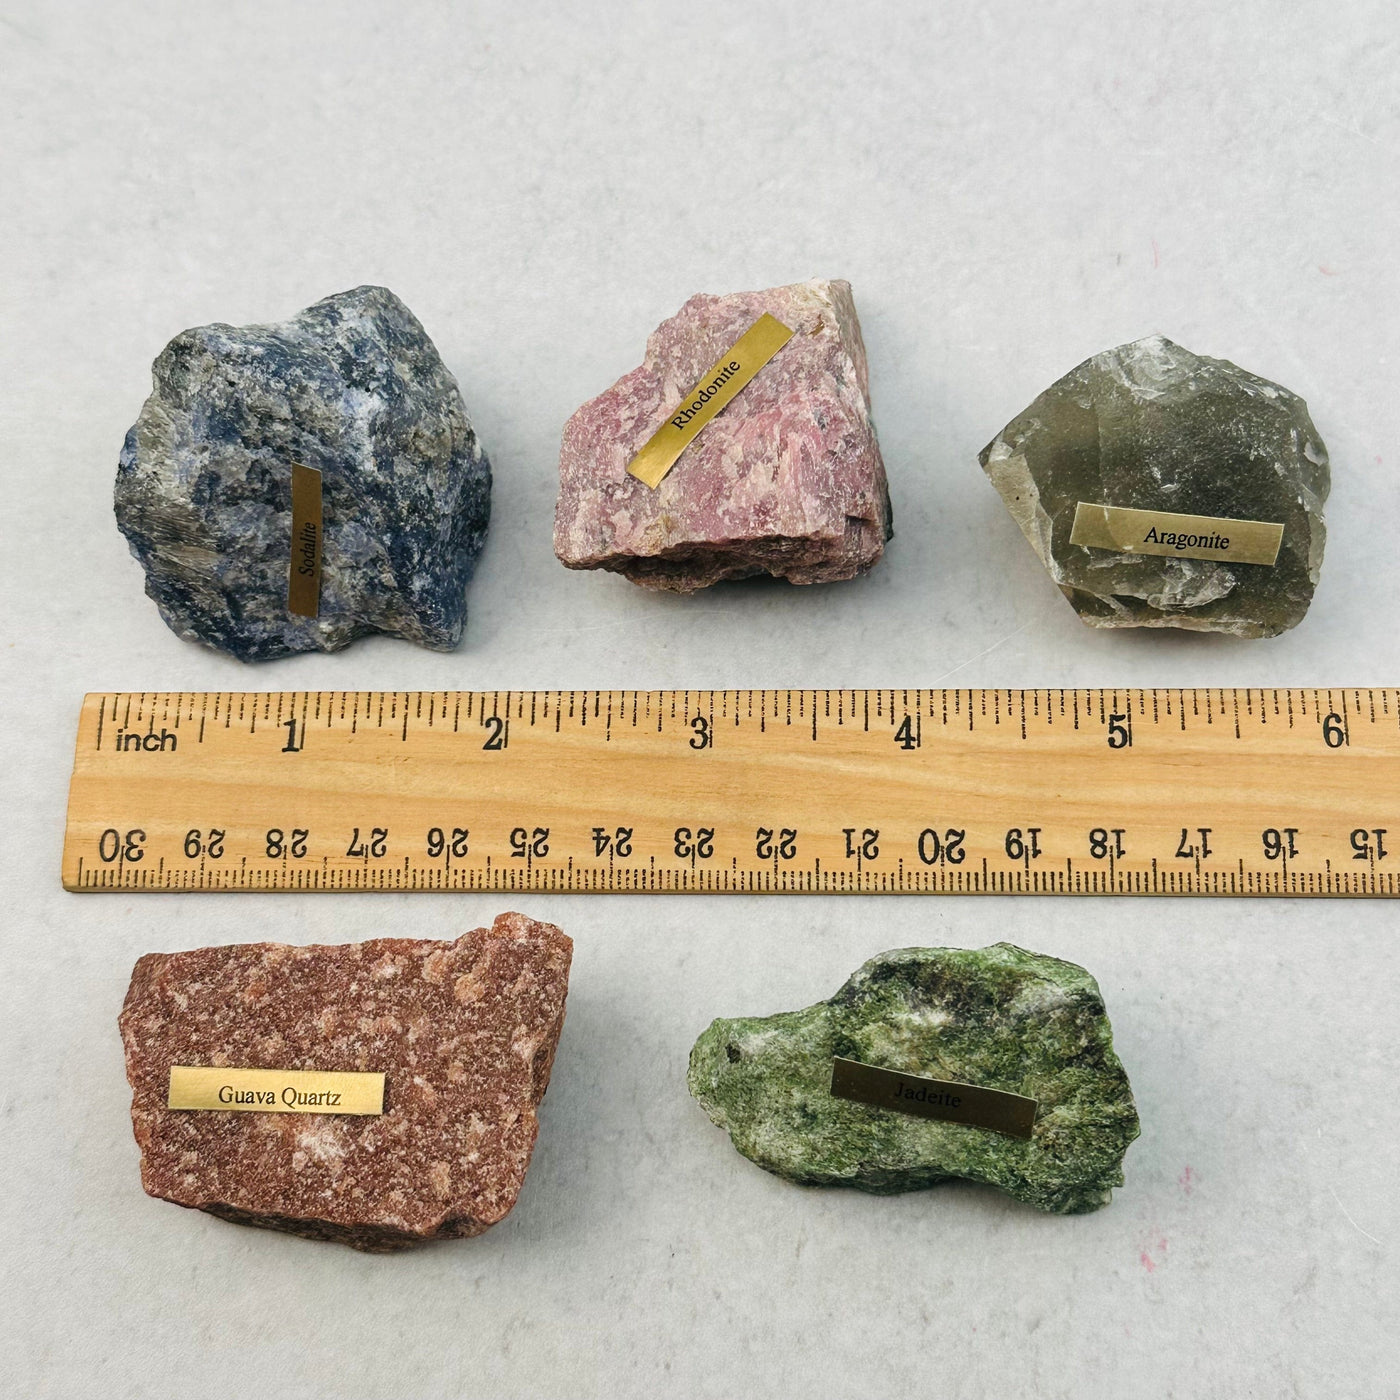 rough stones next to a ruler for size reference 